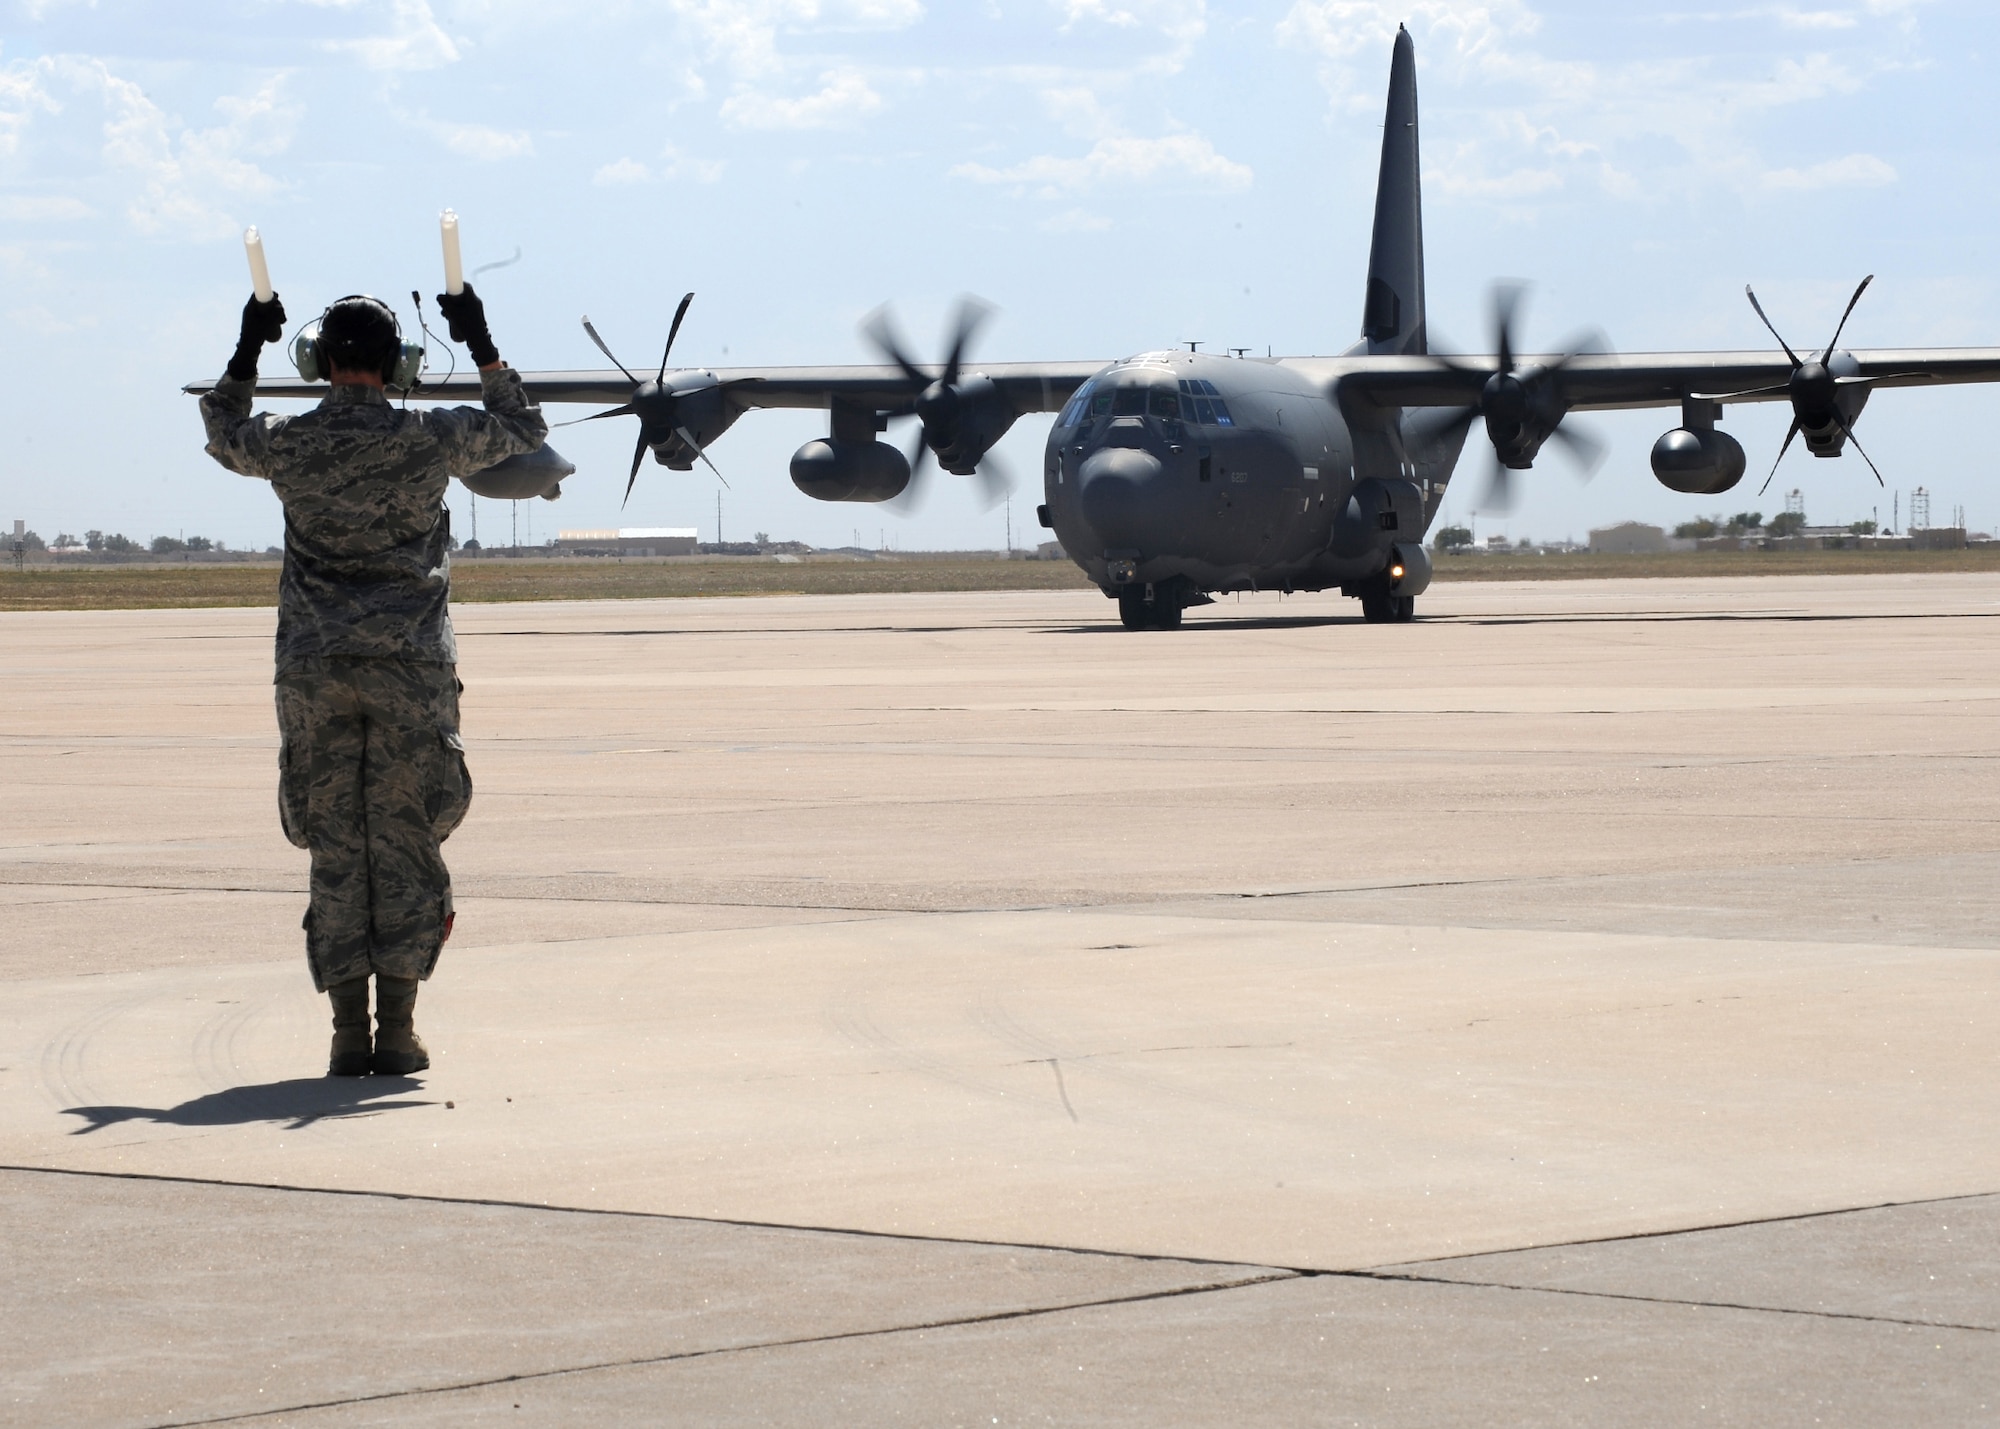 The MC-130J Combat Shadow II is marshaled into place at Cannon Air Force Base, Sept. 29, 2011. The MC-130J is the newest variant of the C-130J Super Hercules four-engine turboprop aircraft. (U.S. Air Force photo by Airman 1st Class Xavier Lockley)